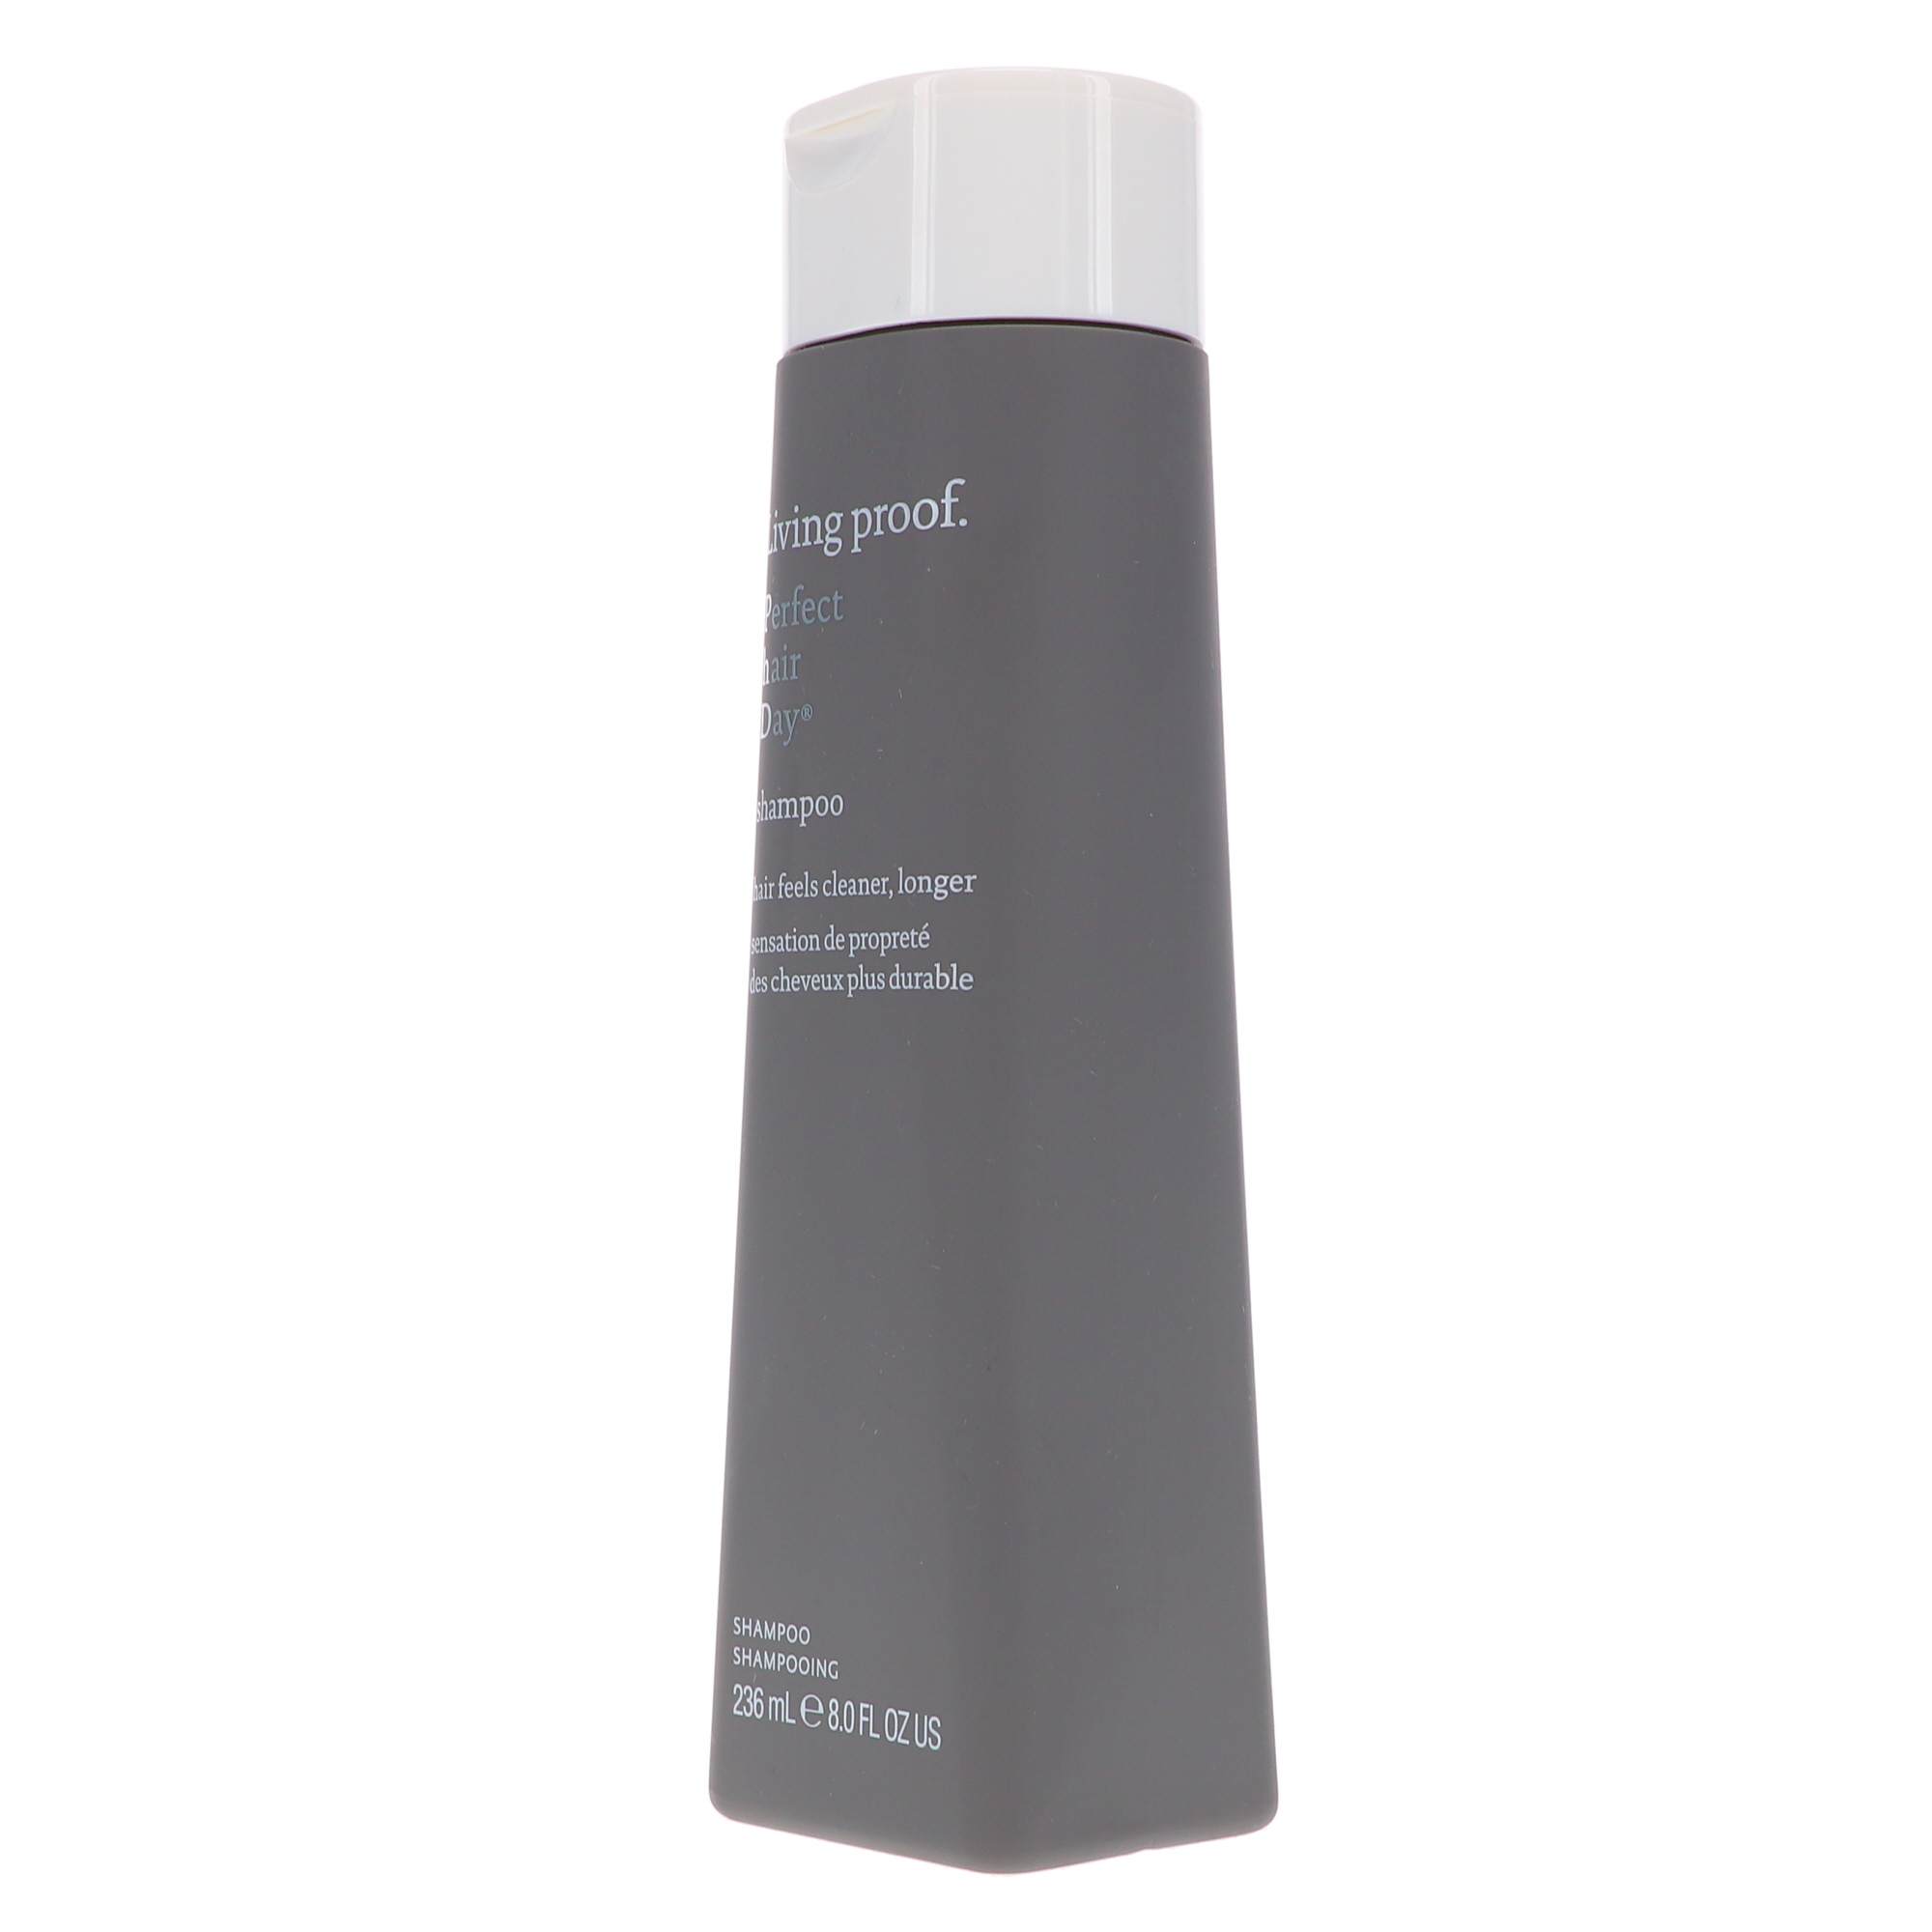 Living Proof Perfect Hair Day Shampoo 8 oz - image 2 of 8